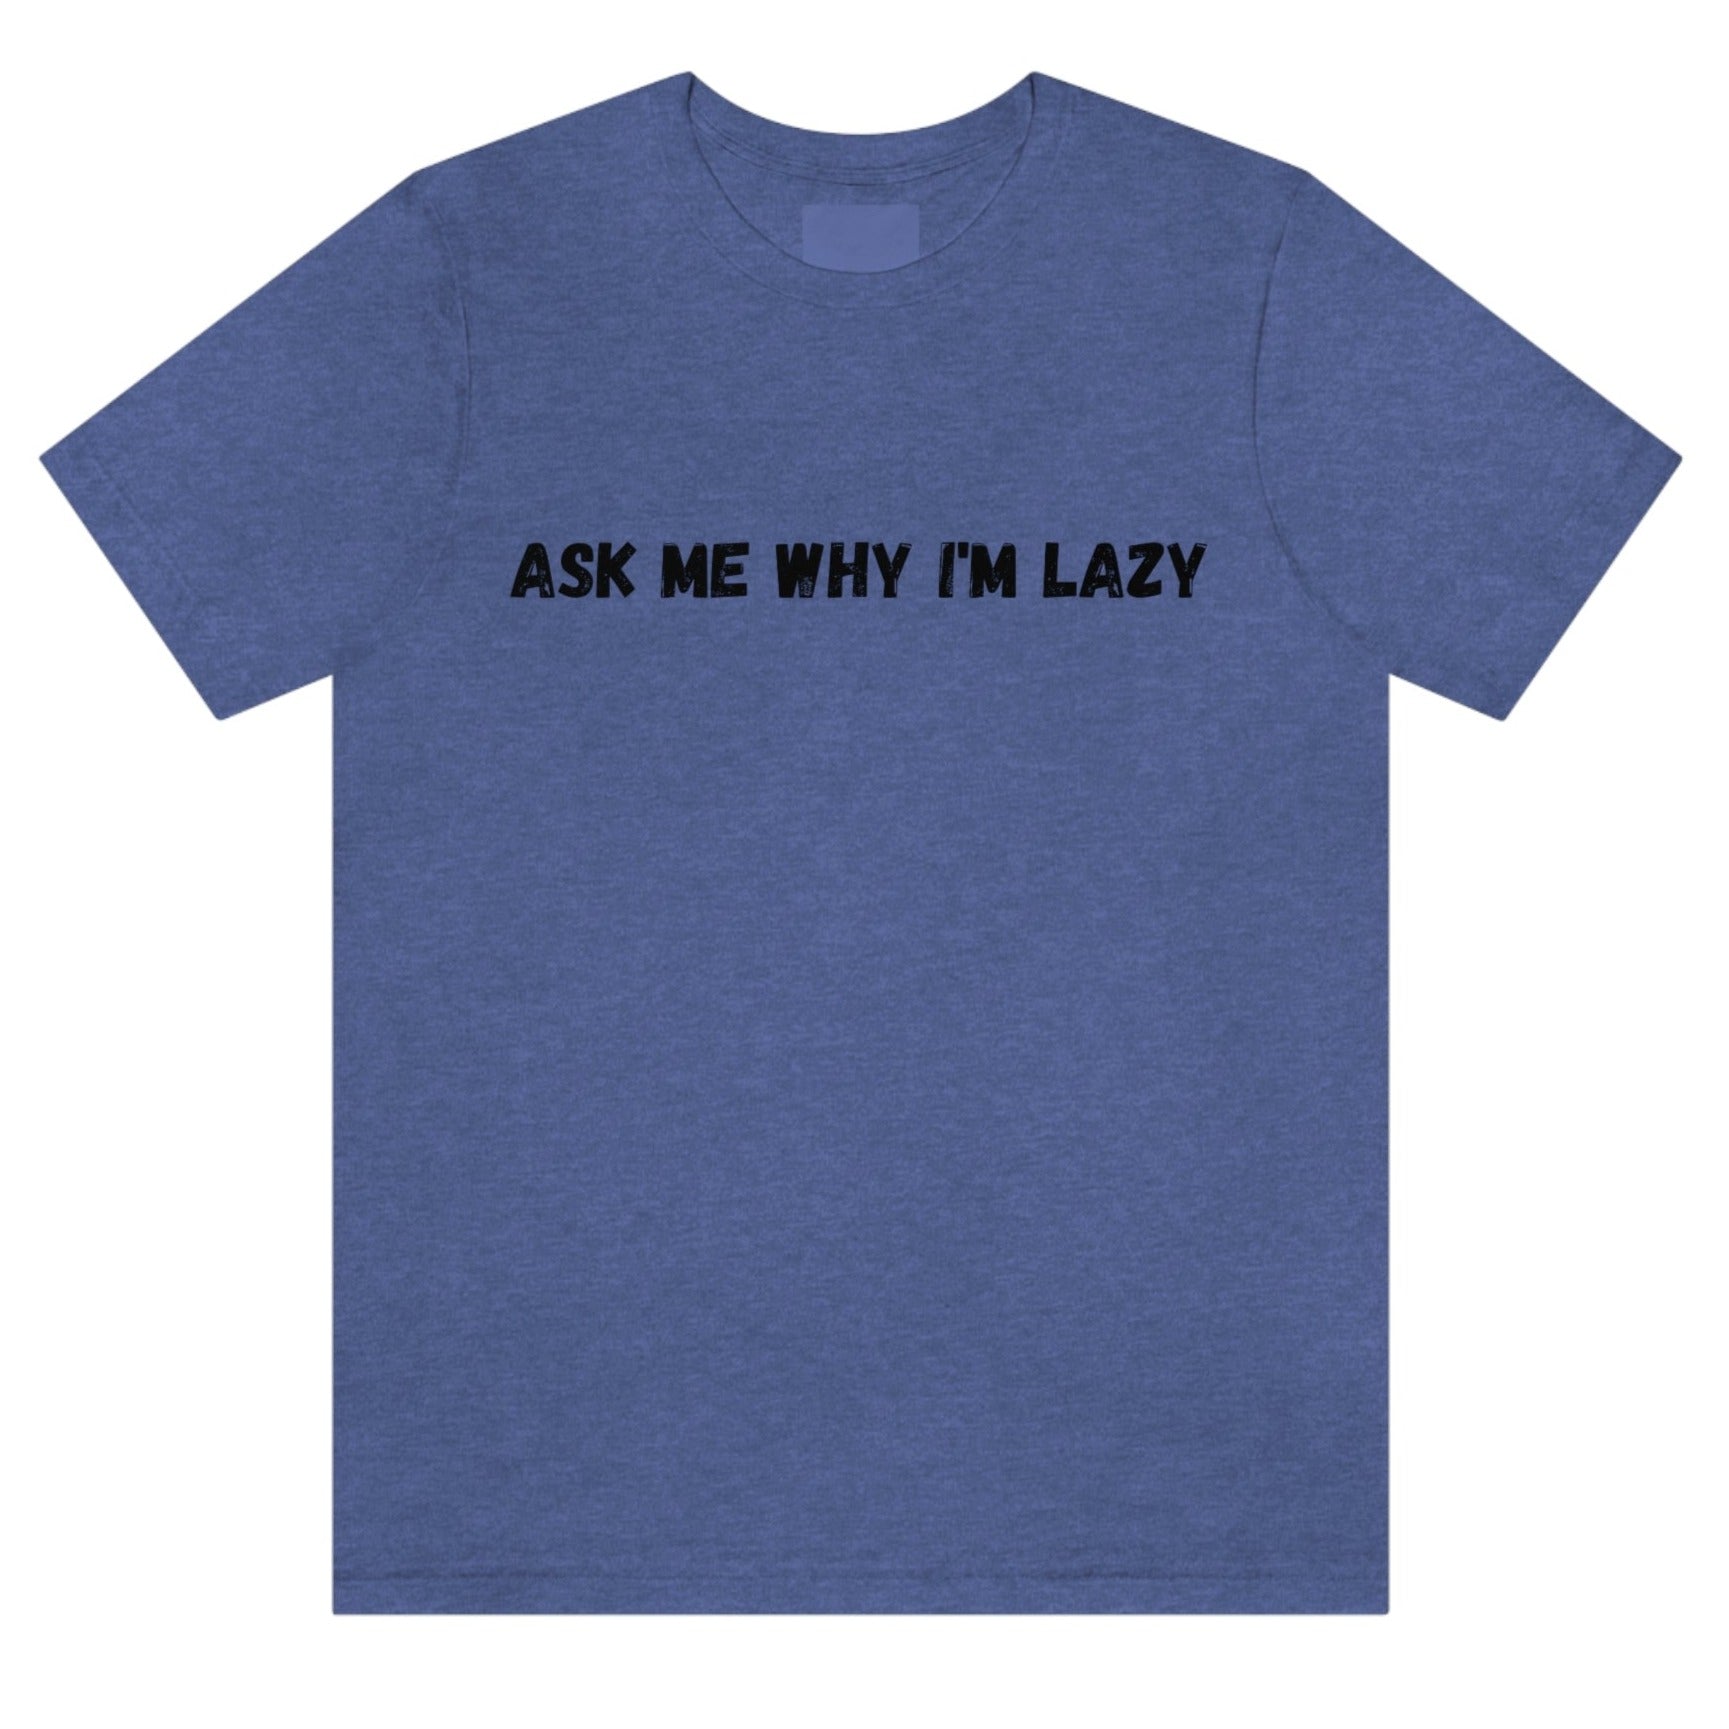 ask-me-why-im-lazy-heather-true-royal-blue-t-shirt-unisex-funny